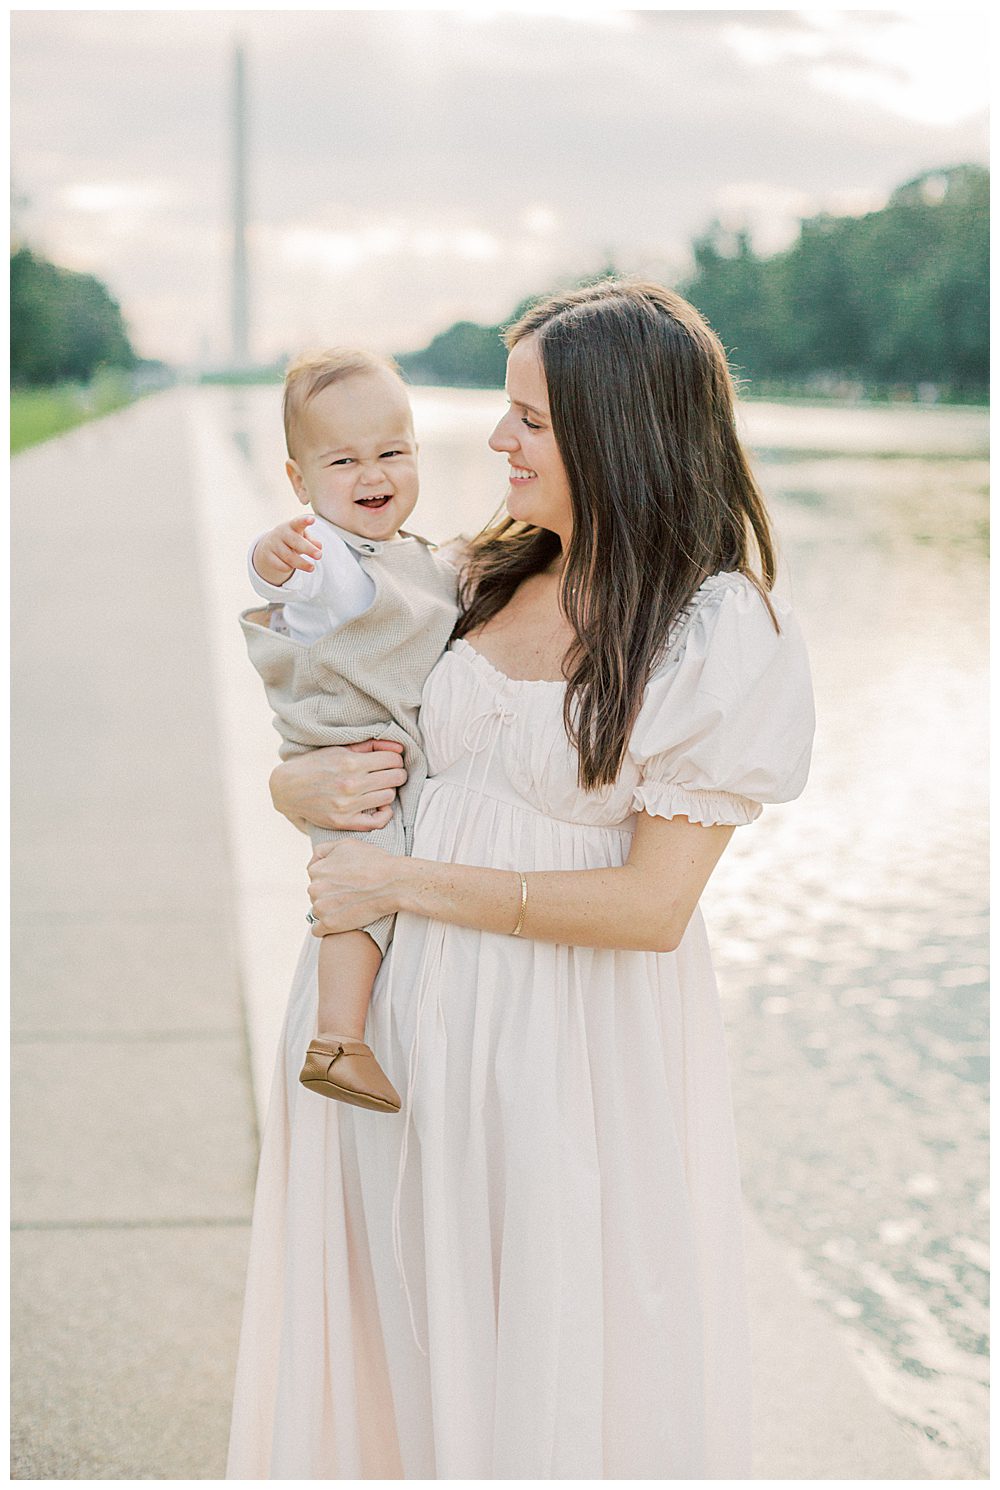 Mother smiles at her toddler son while holding him in front of the Reflecting Pool in Washington DC.